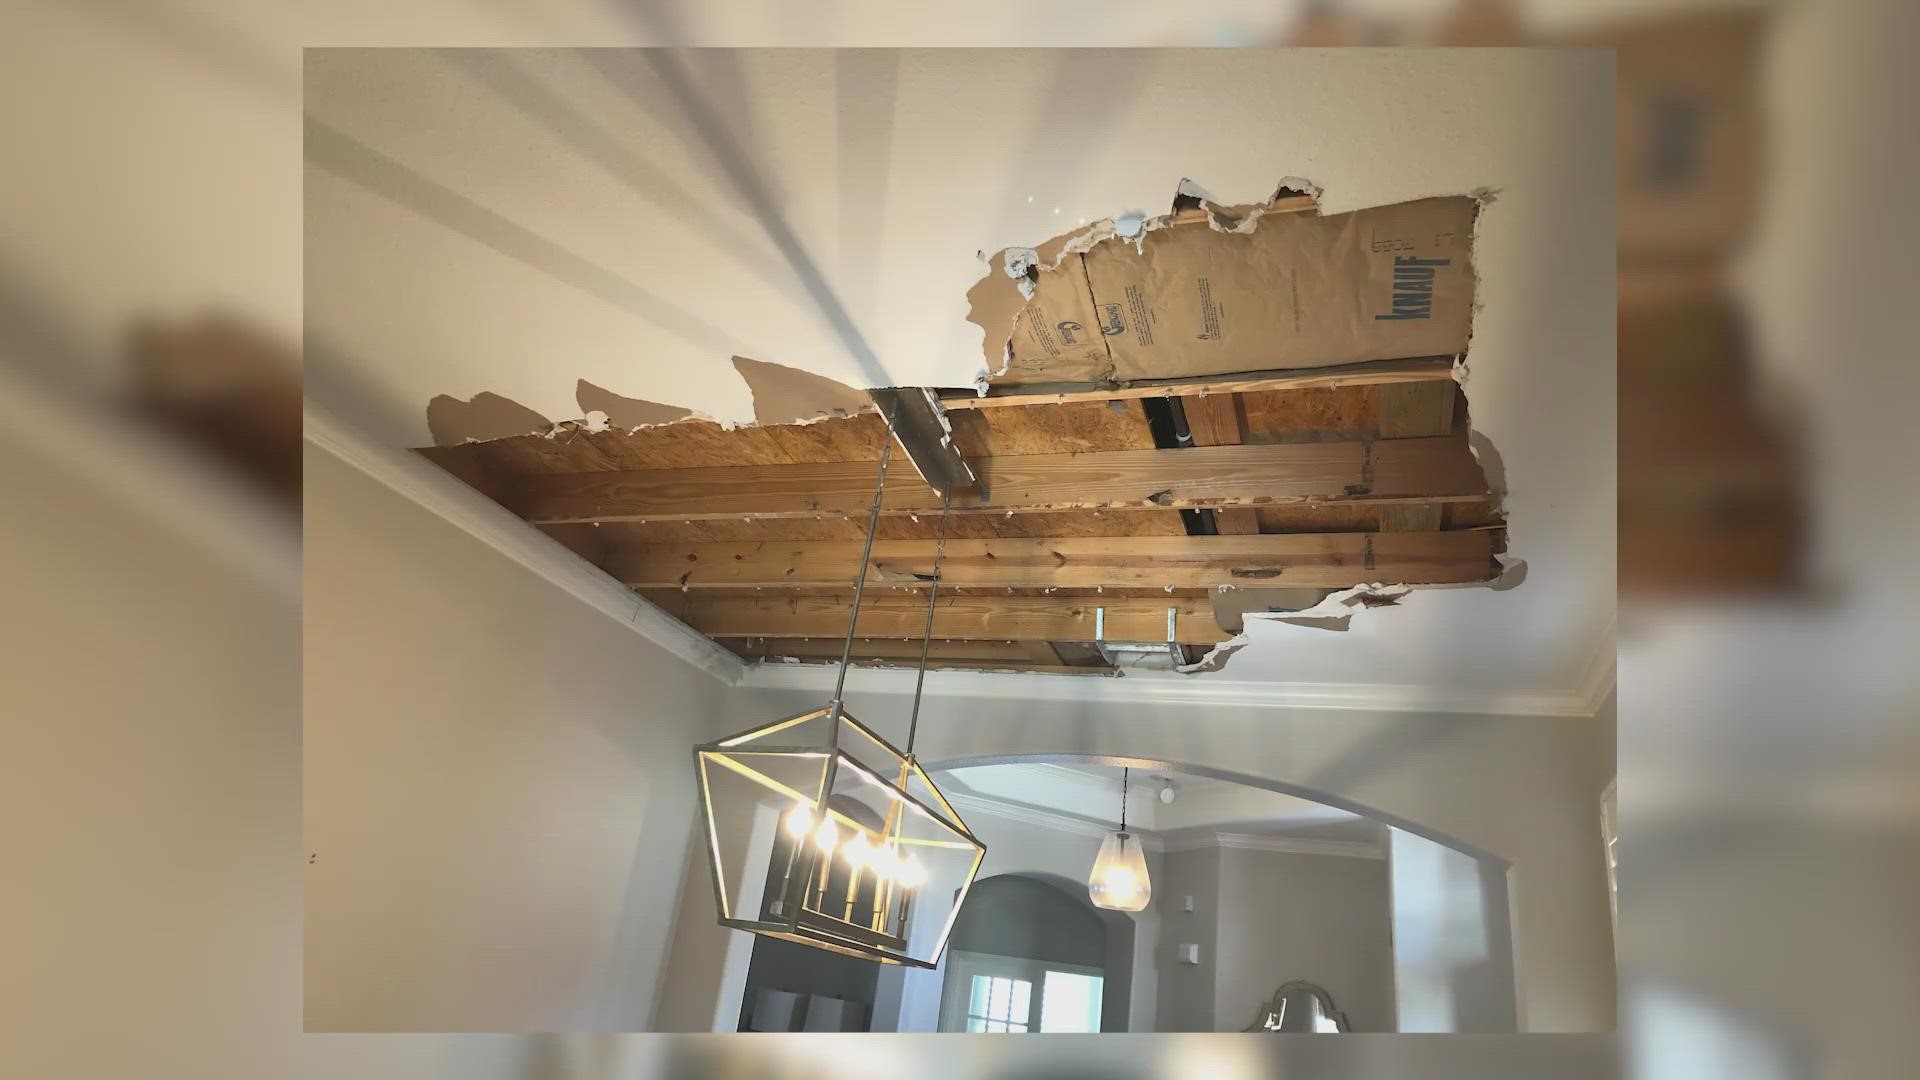 "It just gushed water all the way down our main dining room area."